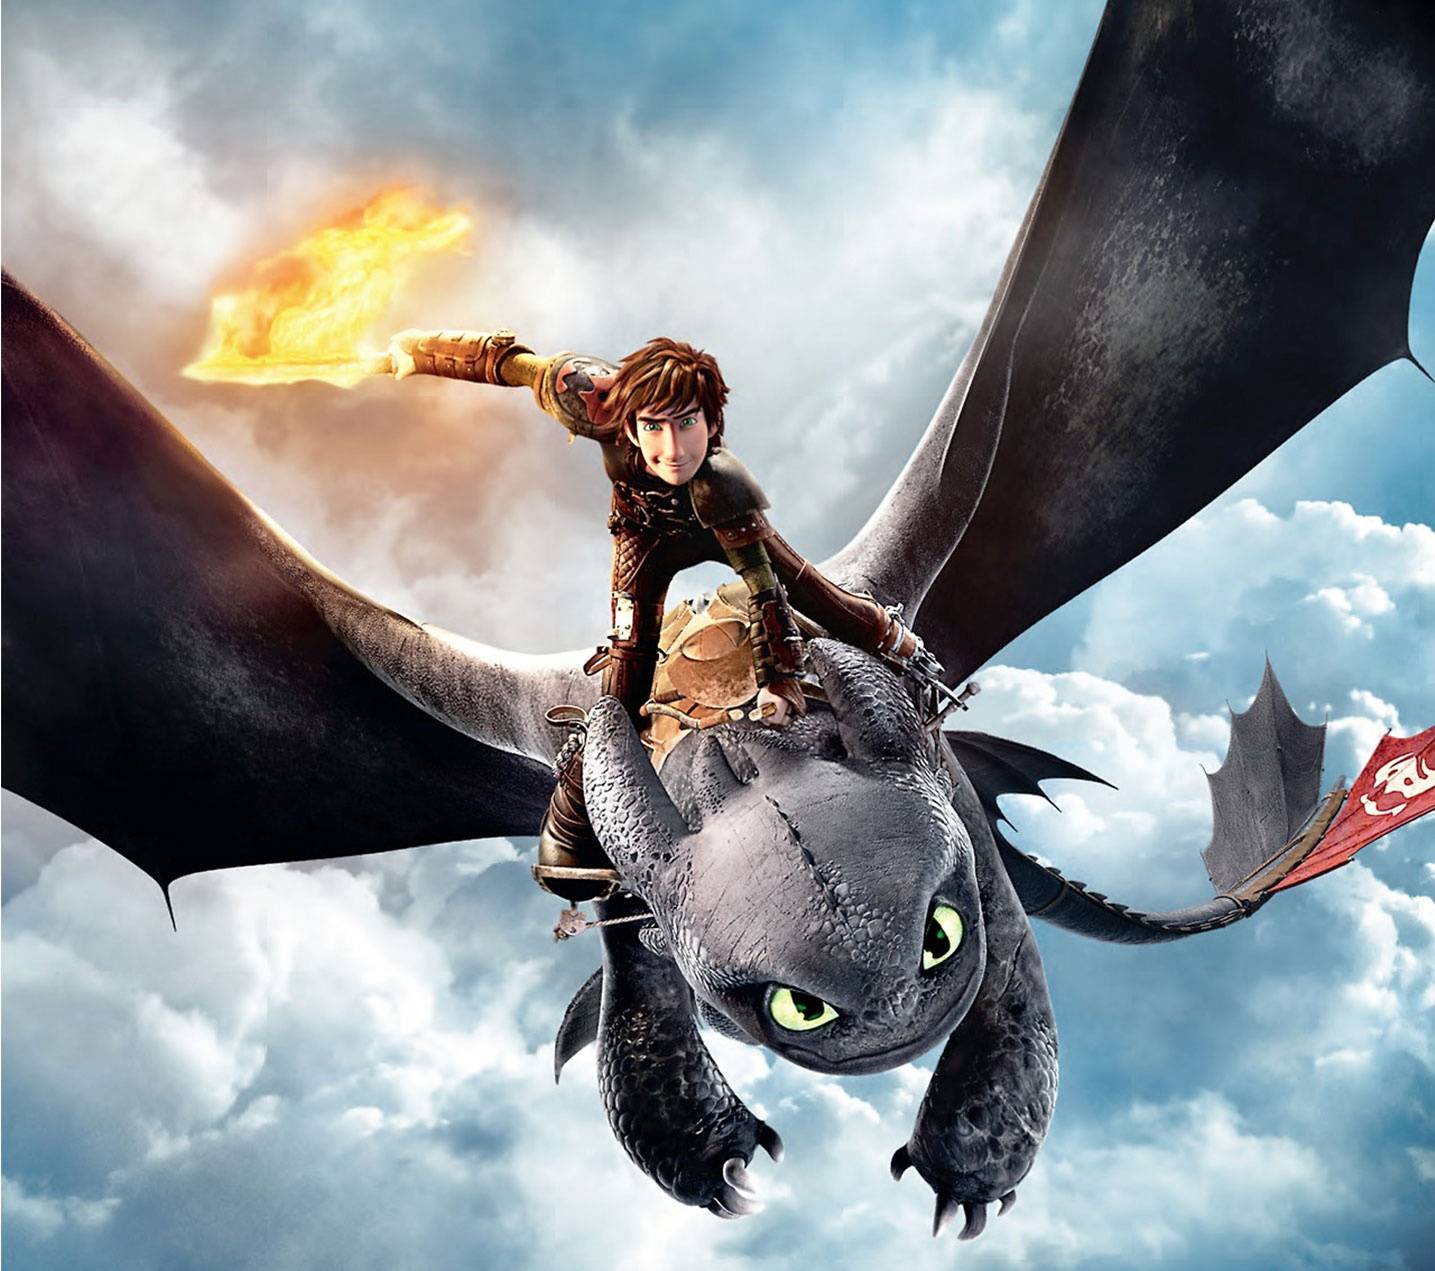 Hiccup and Toothless Wallpaper